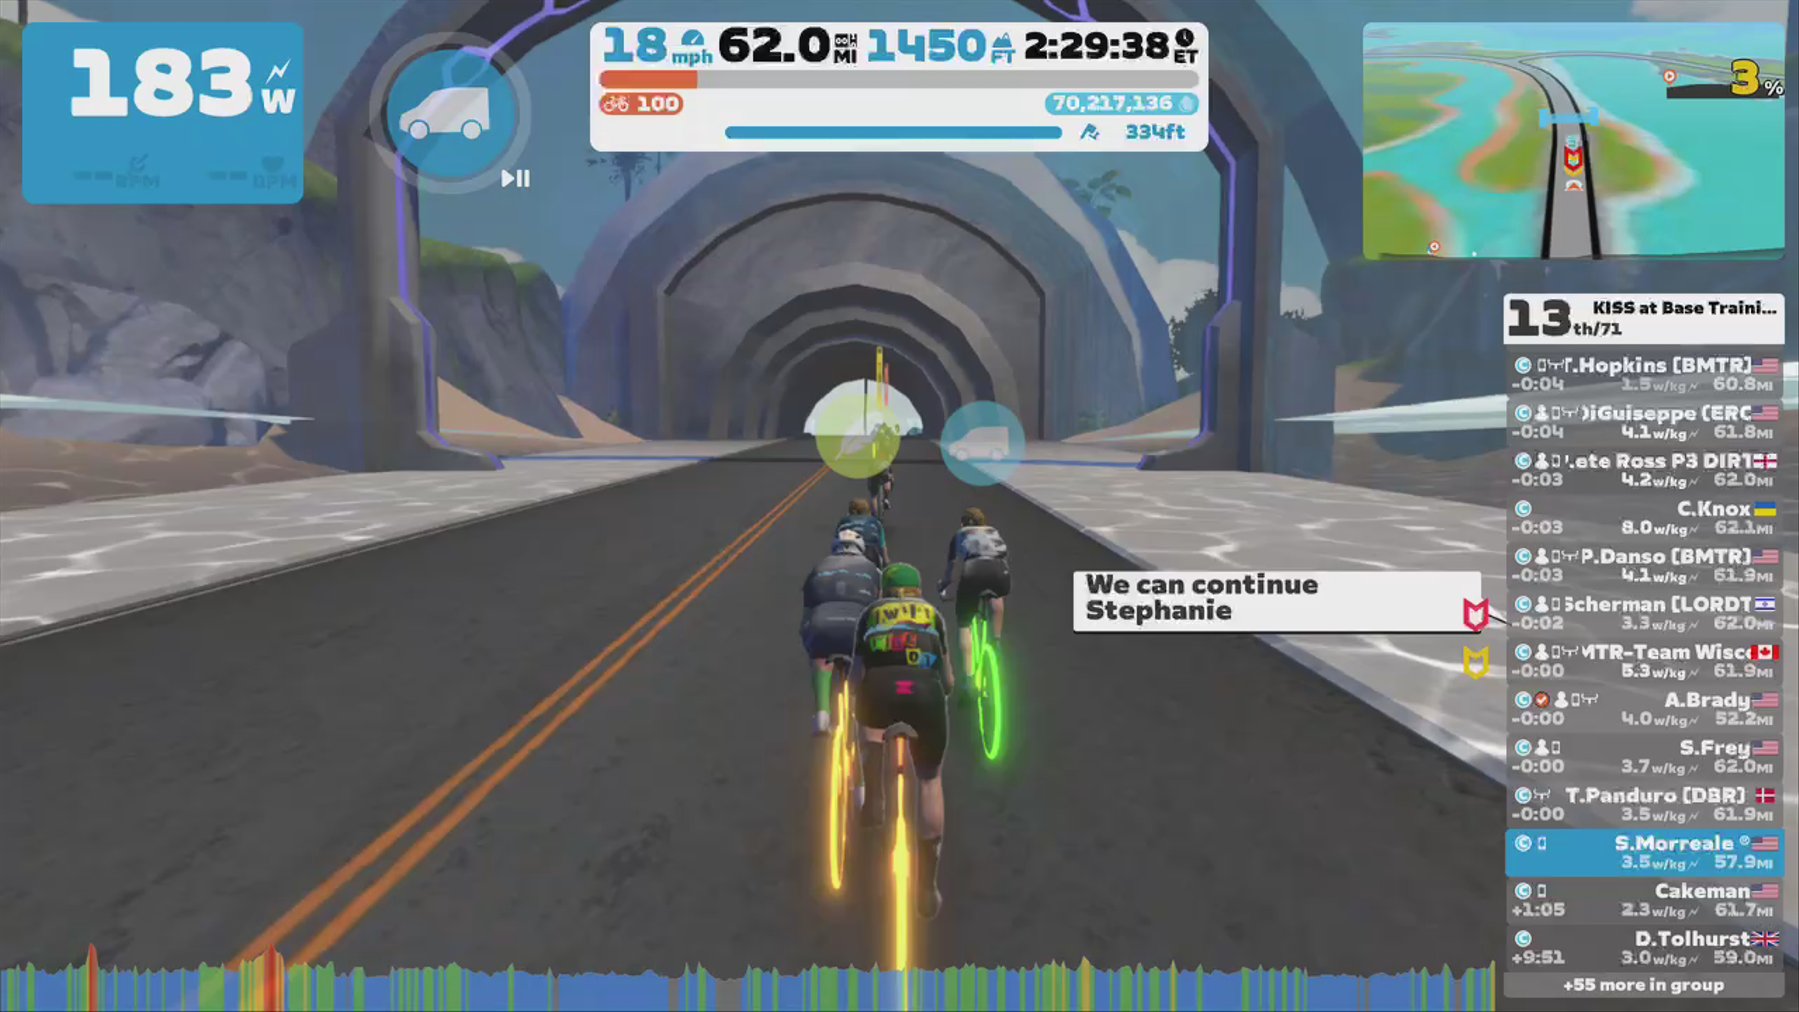 Zwift - Group Ride: KISS at Base Training Ride (C) on Triple Flat Loops in Watopia